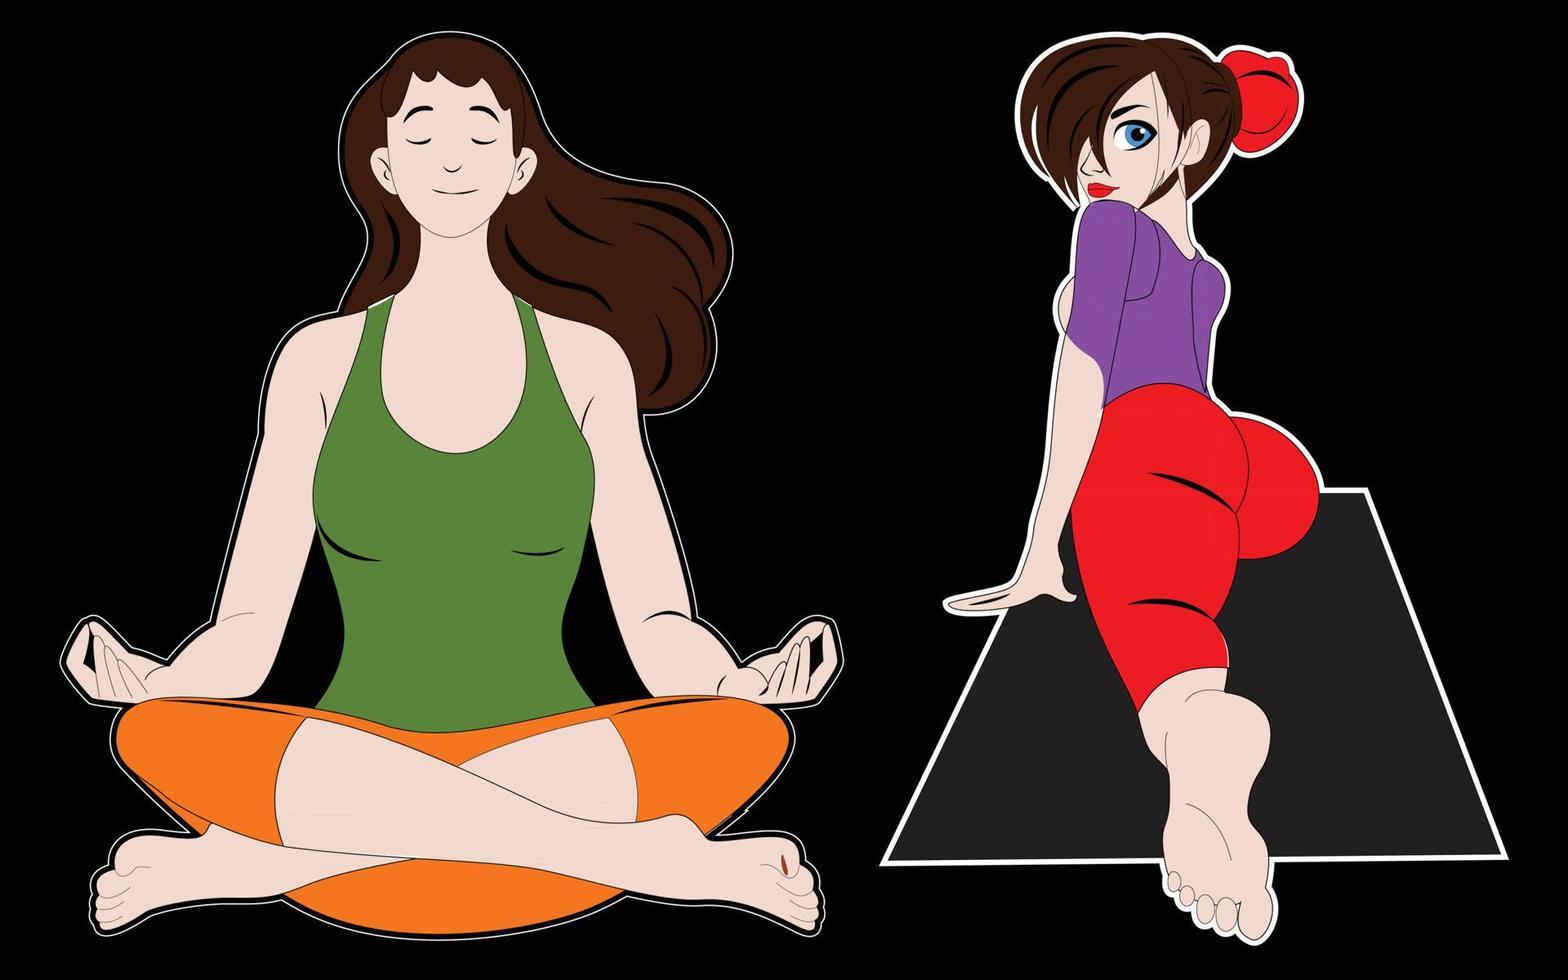 Woman sport activities. Beautiful young woman do fitness activities, female character run and yoga exercises vector illustration set. Sportive ladies working out.